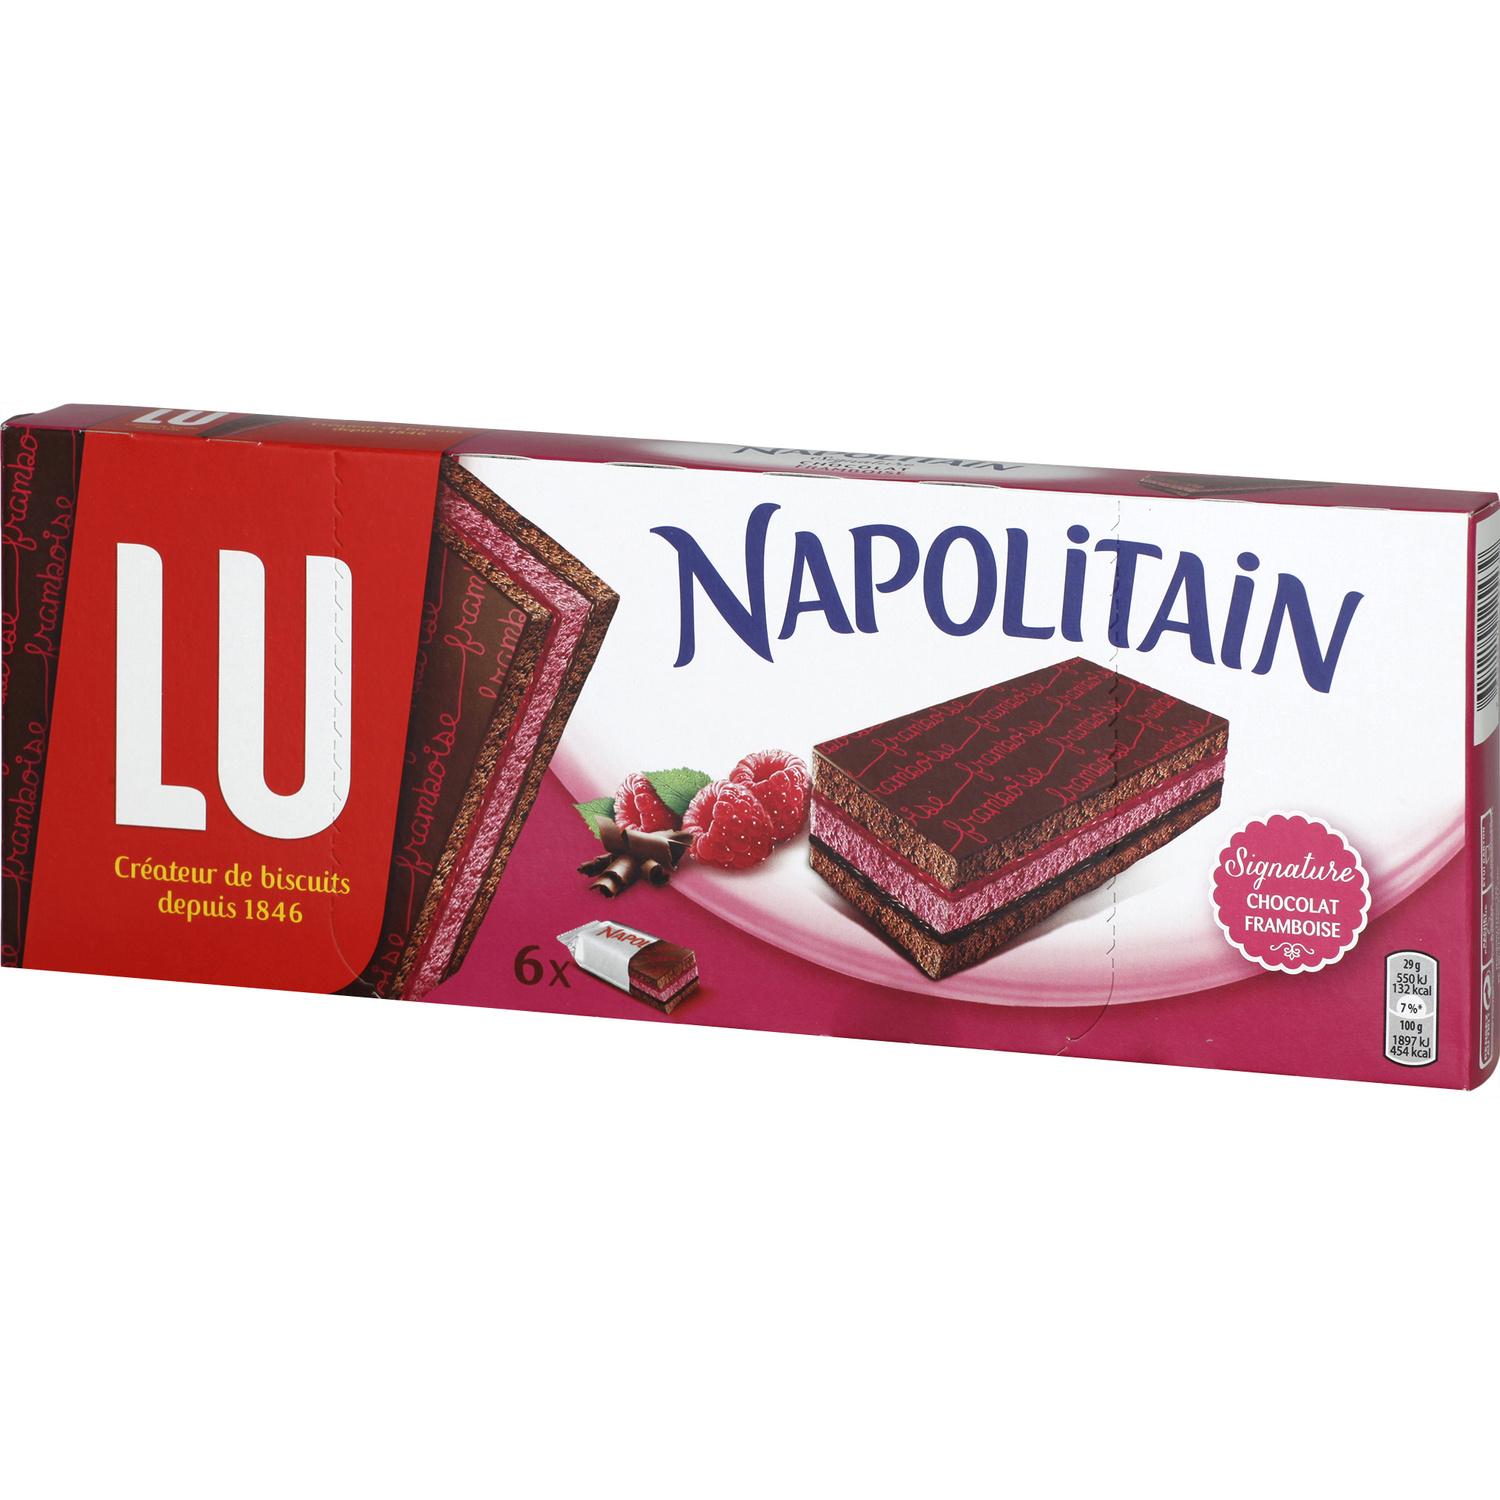 Napolitan Choco Raspberry Cakes Signature Buy Online My French Grocery